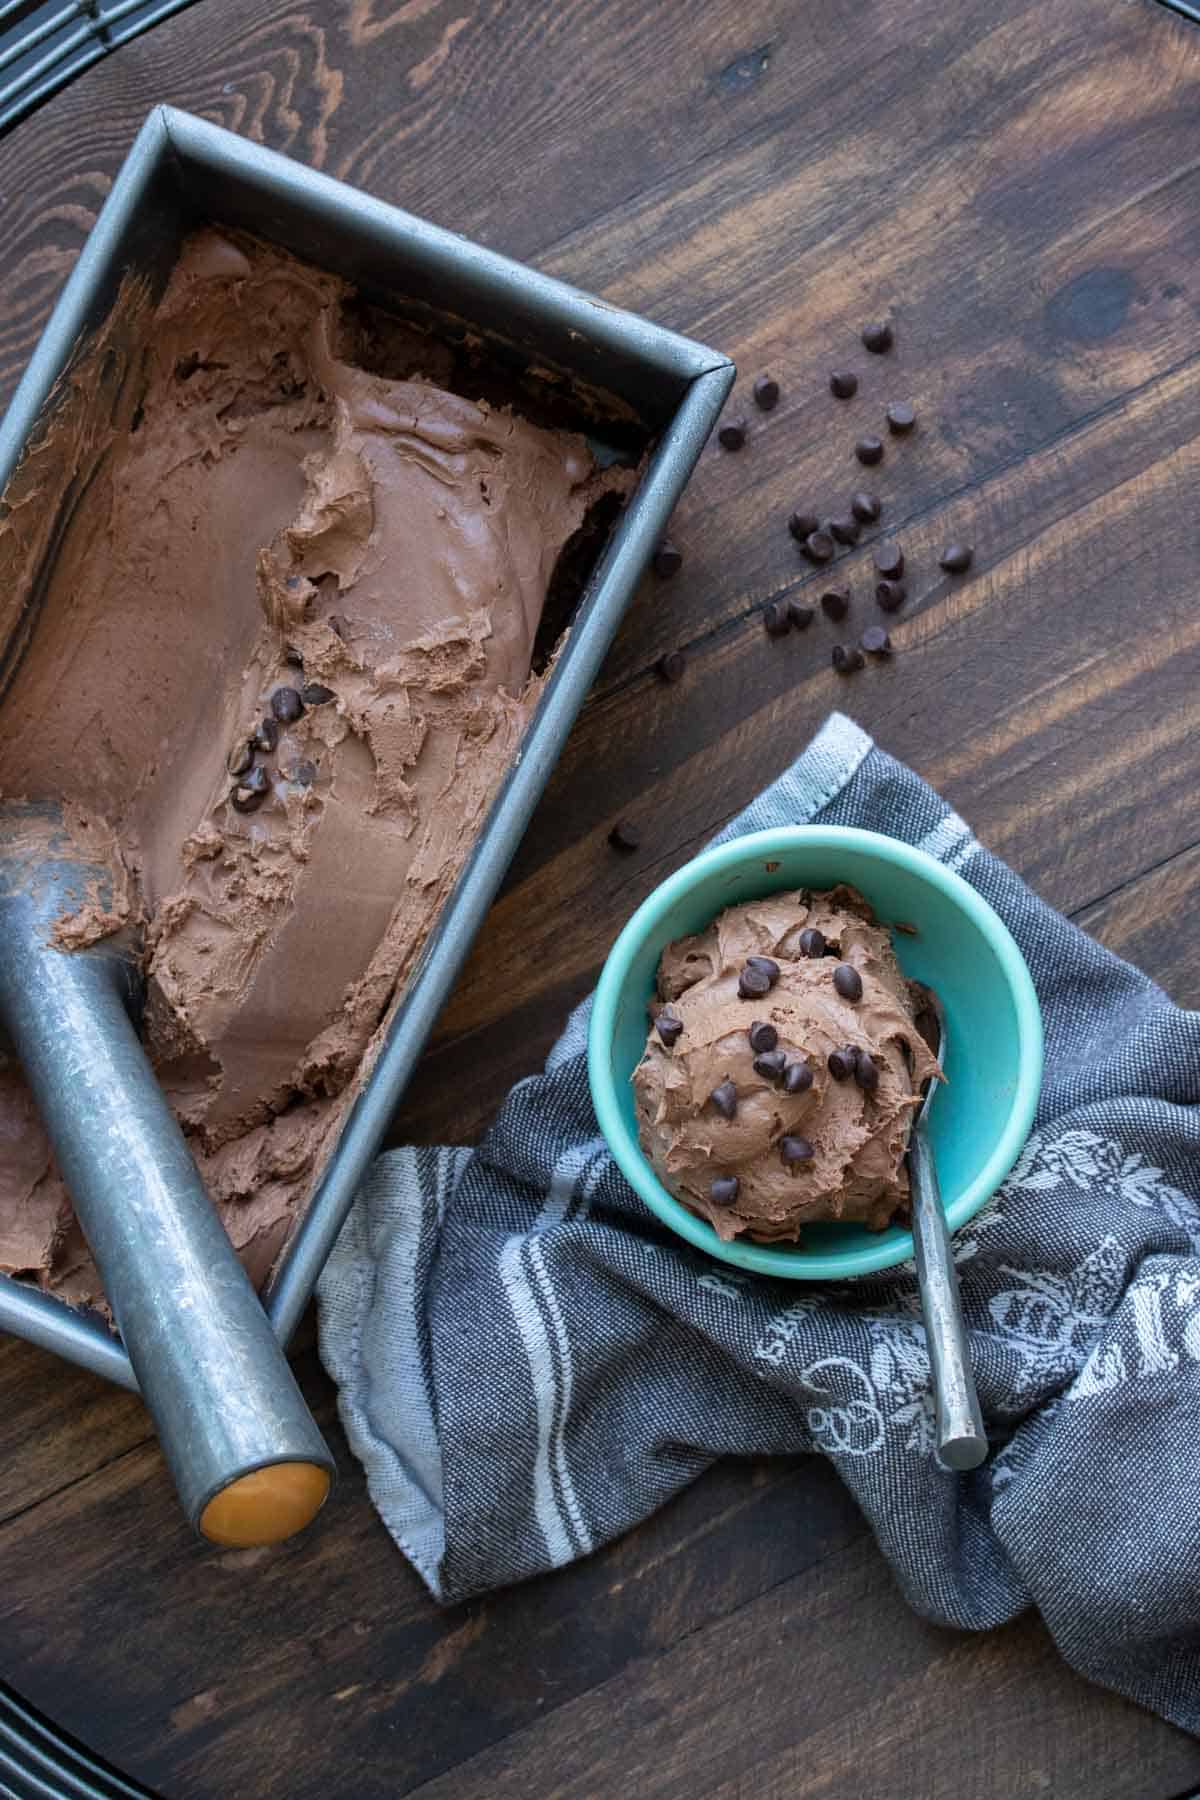 Pan of chocolate ice cream next a bowl of a scoop of it